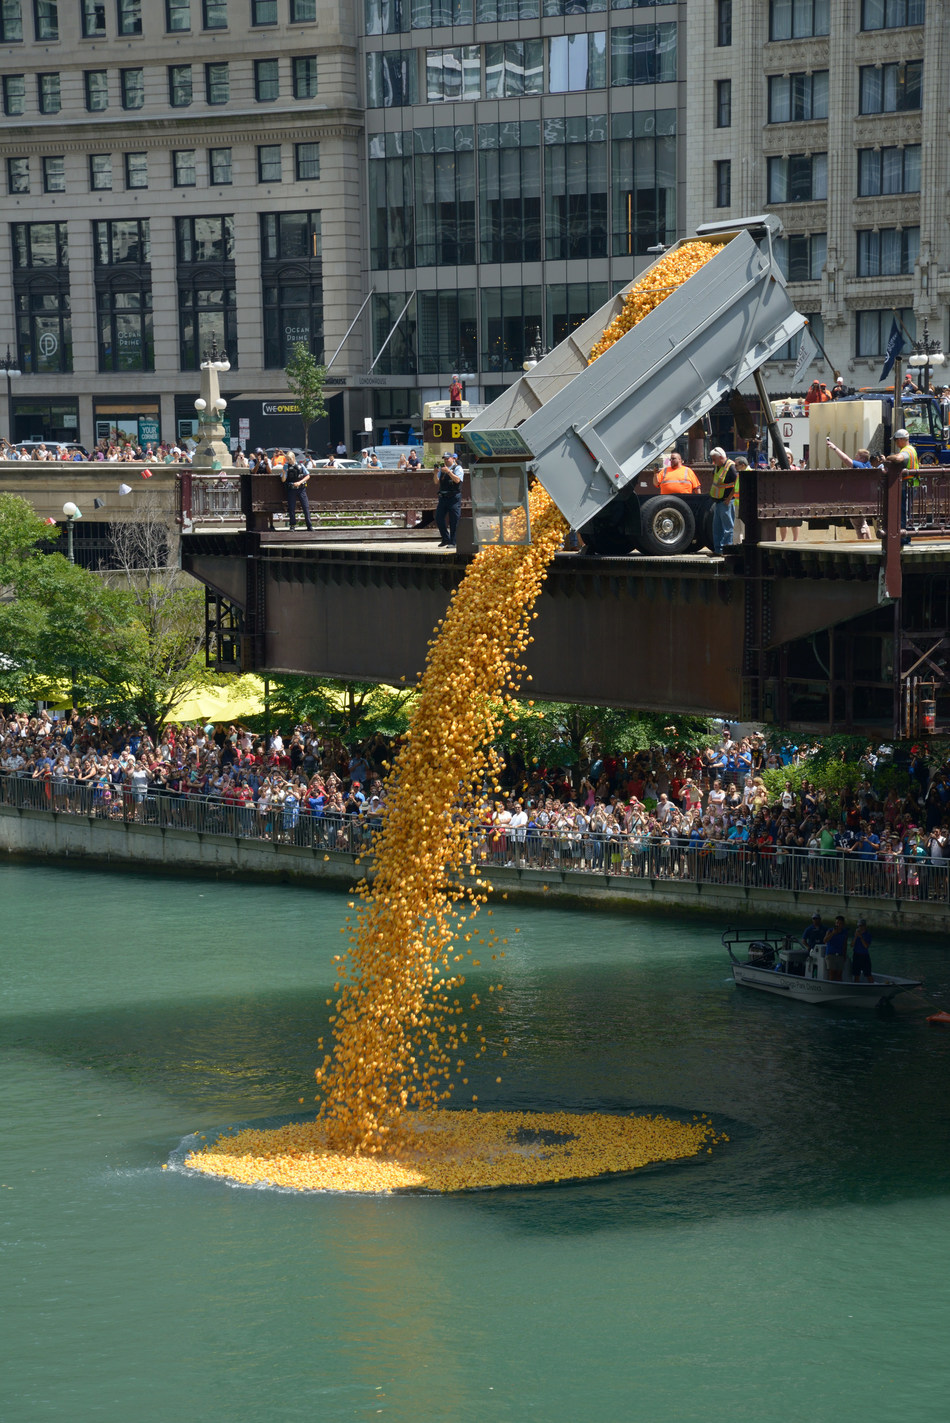 63,000 Rubber Ducks Will Splash into the Chicago River Aug. 8 for